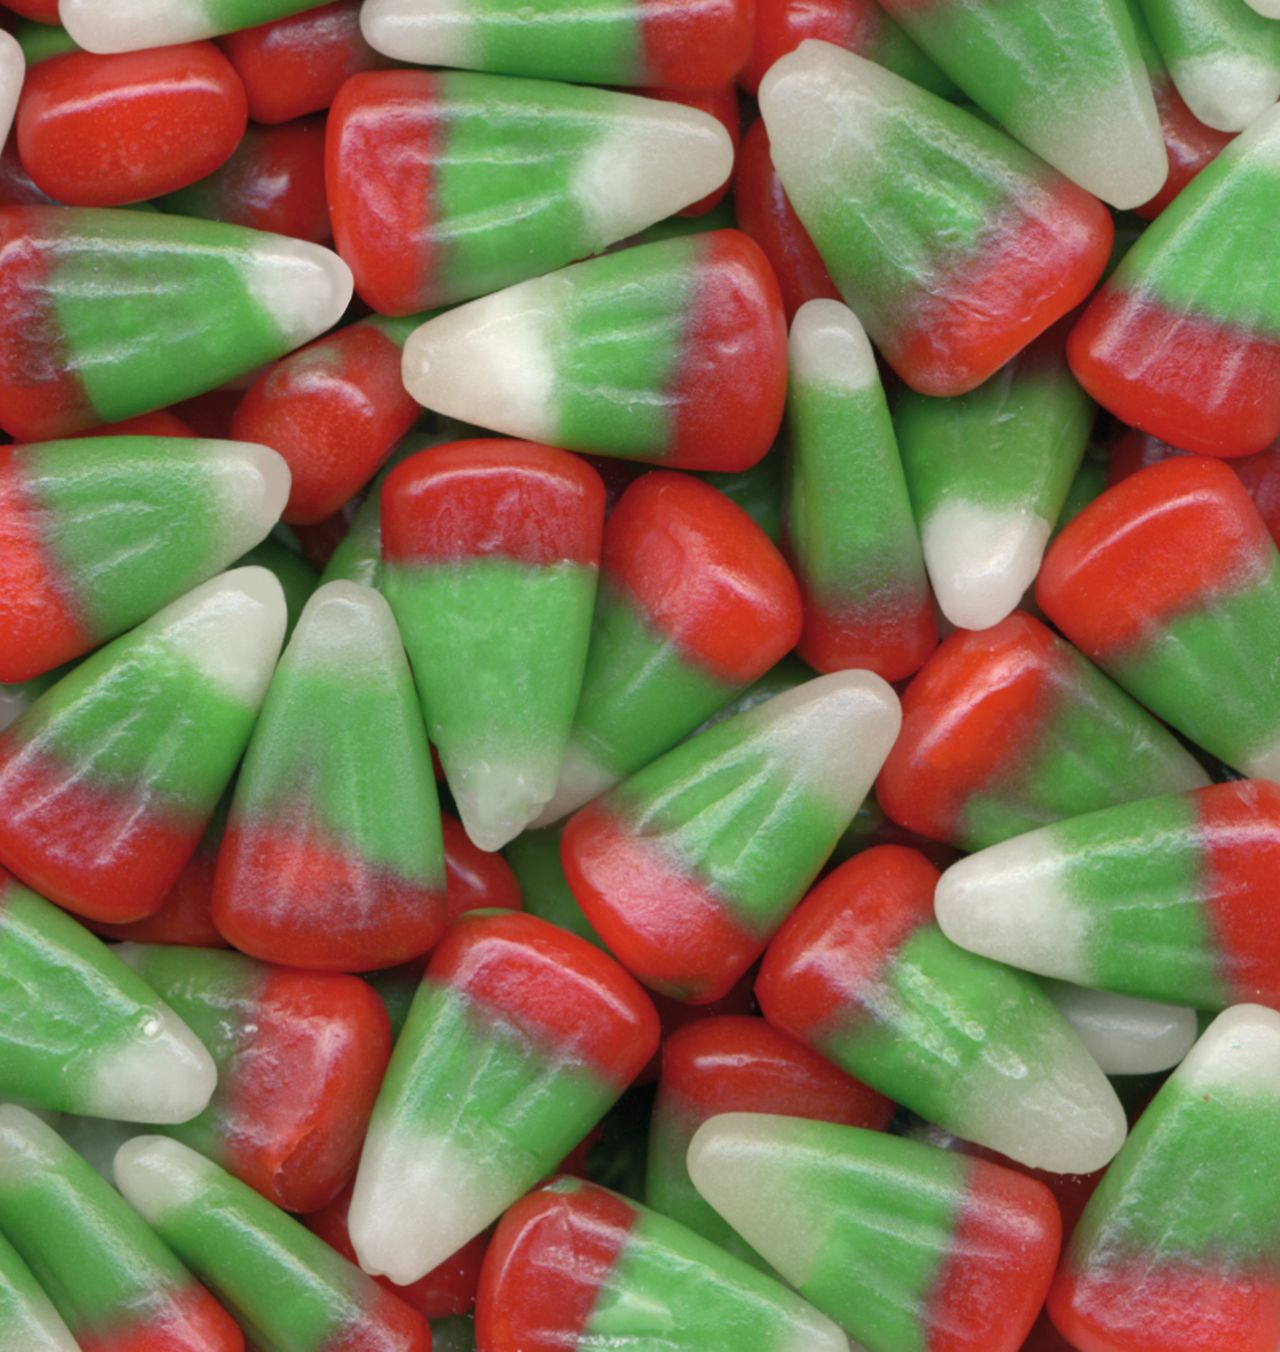 There's a red-and-green version, "Reindeer corn," for the Christmas holidays ...